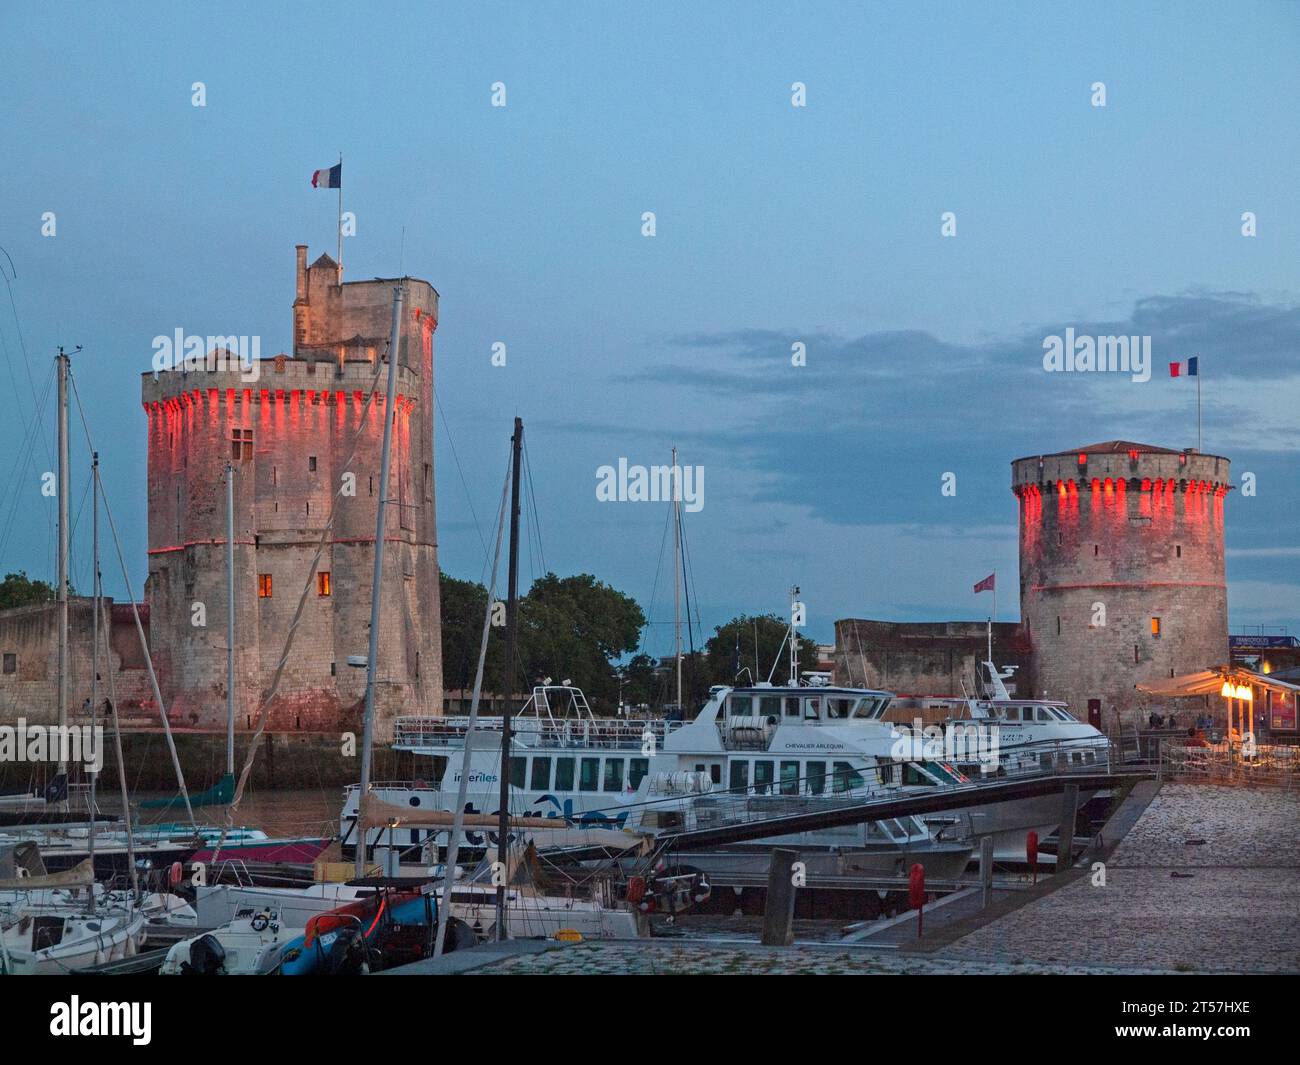 The towers of La Chaine and St Nicholas at the entrance to the port of La Rochelle, France Stock Photo